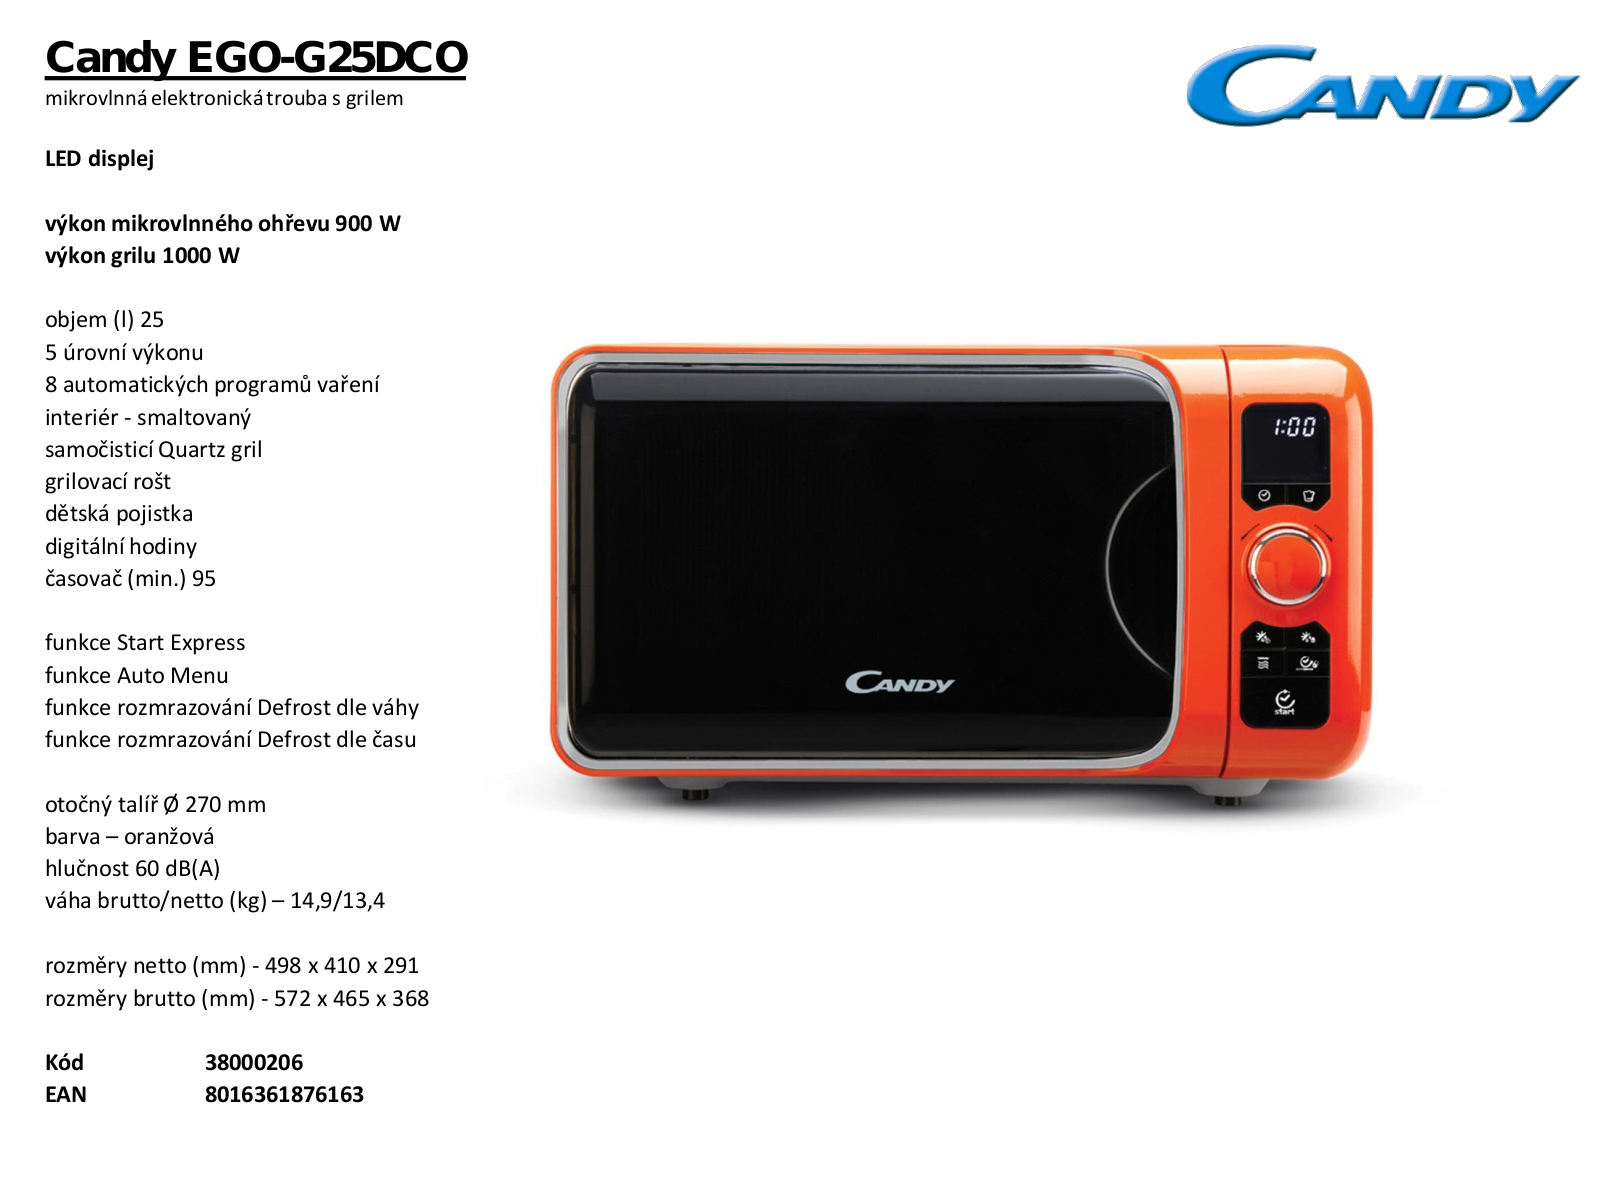 Candy EGO-G 25D CO User Manual